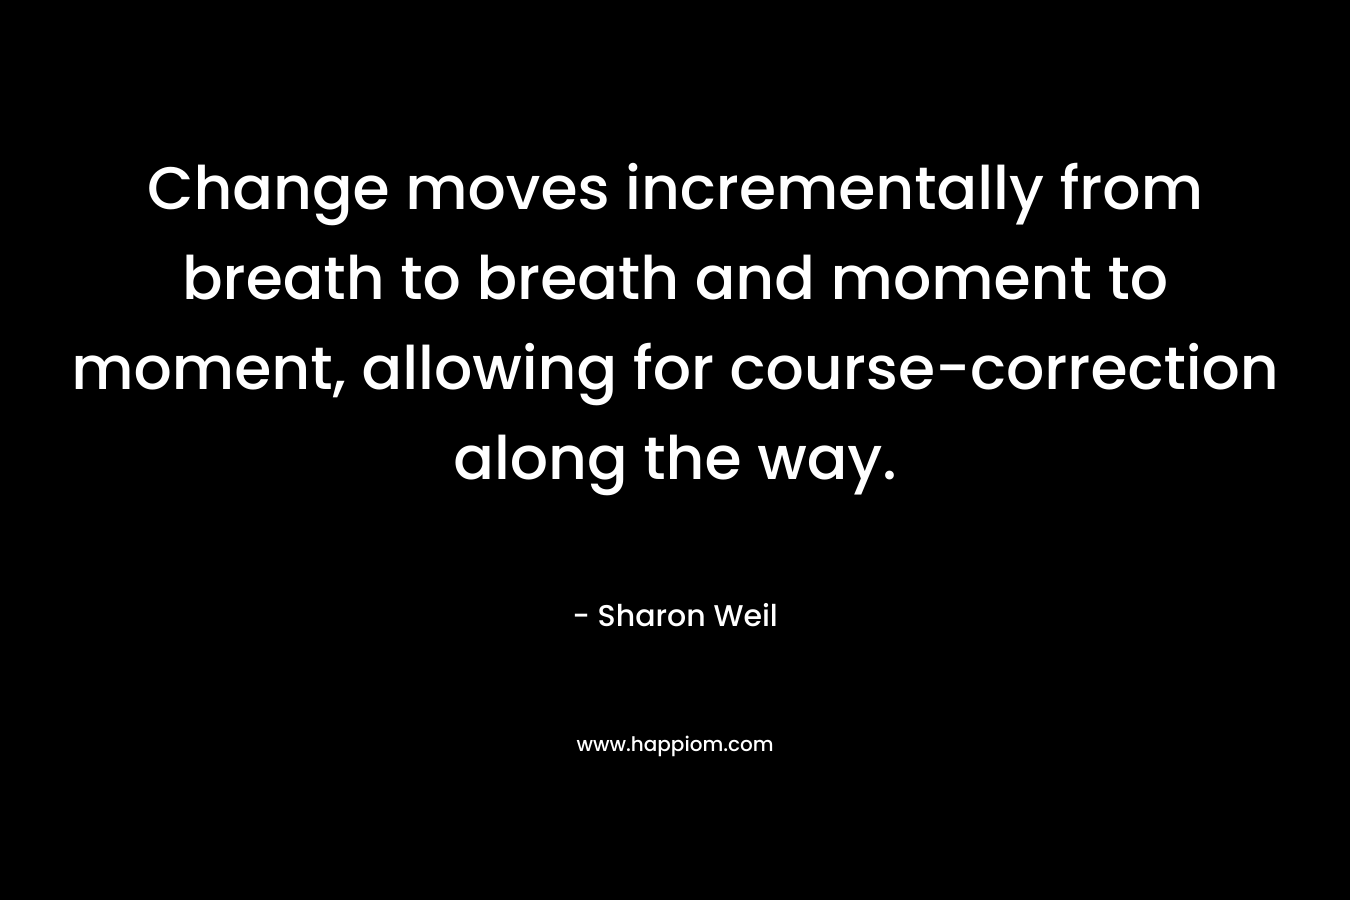 Change moves incrementally from breath to breath and moment to moment, allowing for course-correction along the way. – Sharon Weil